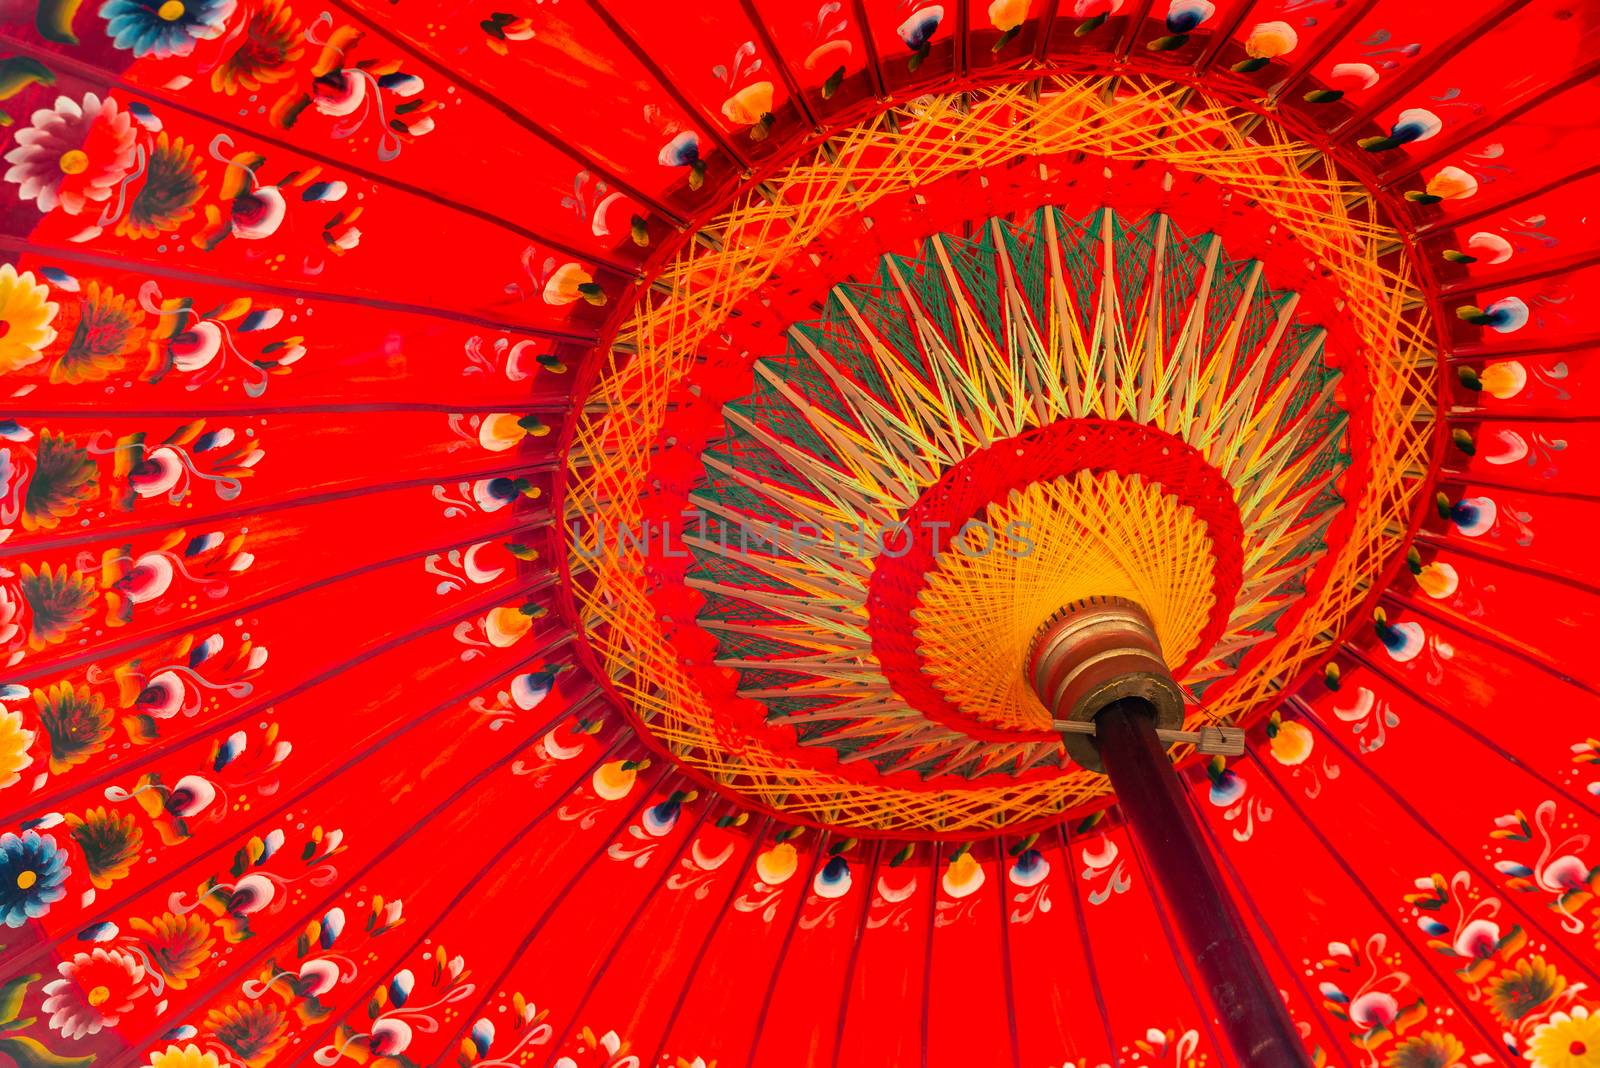 Detail shot of a red umbrella in Bali, Indonesia